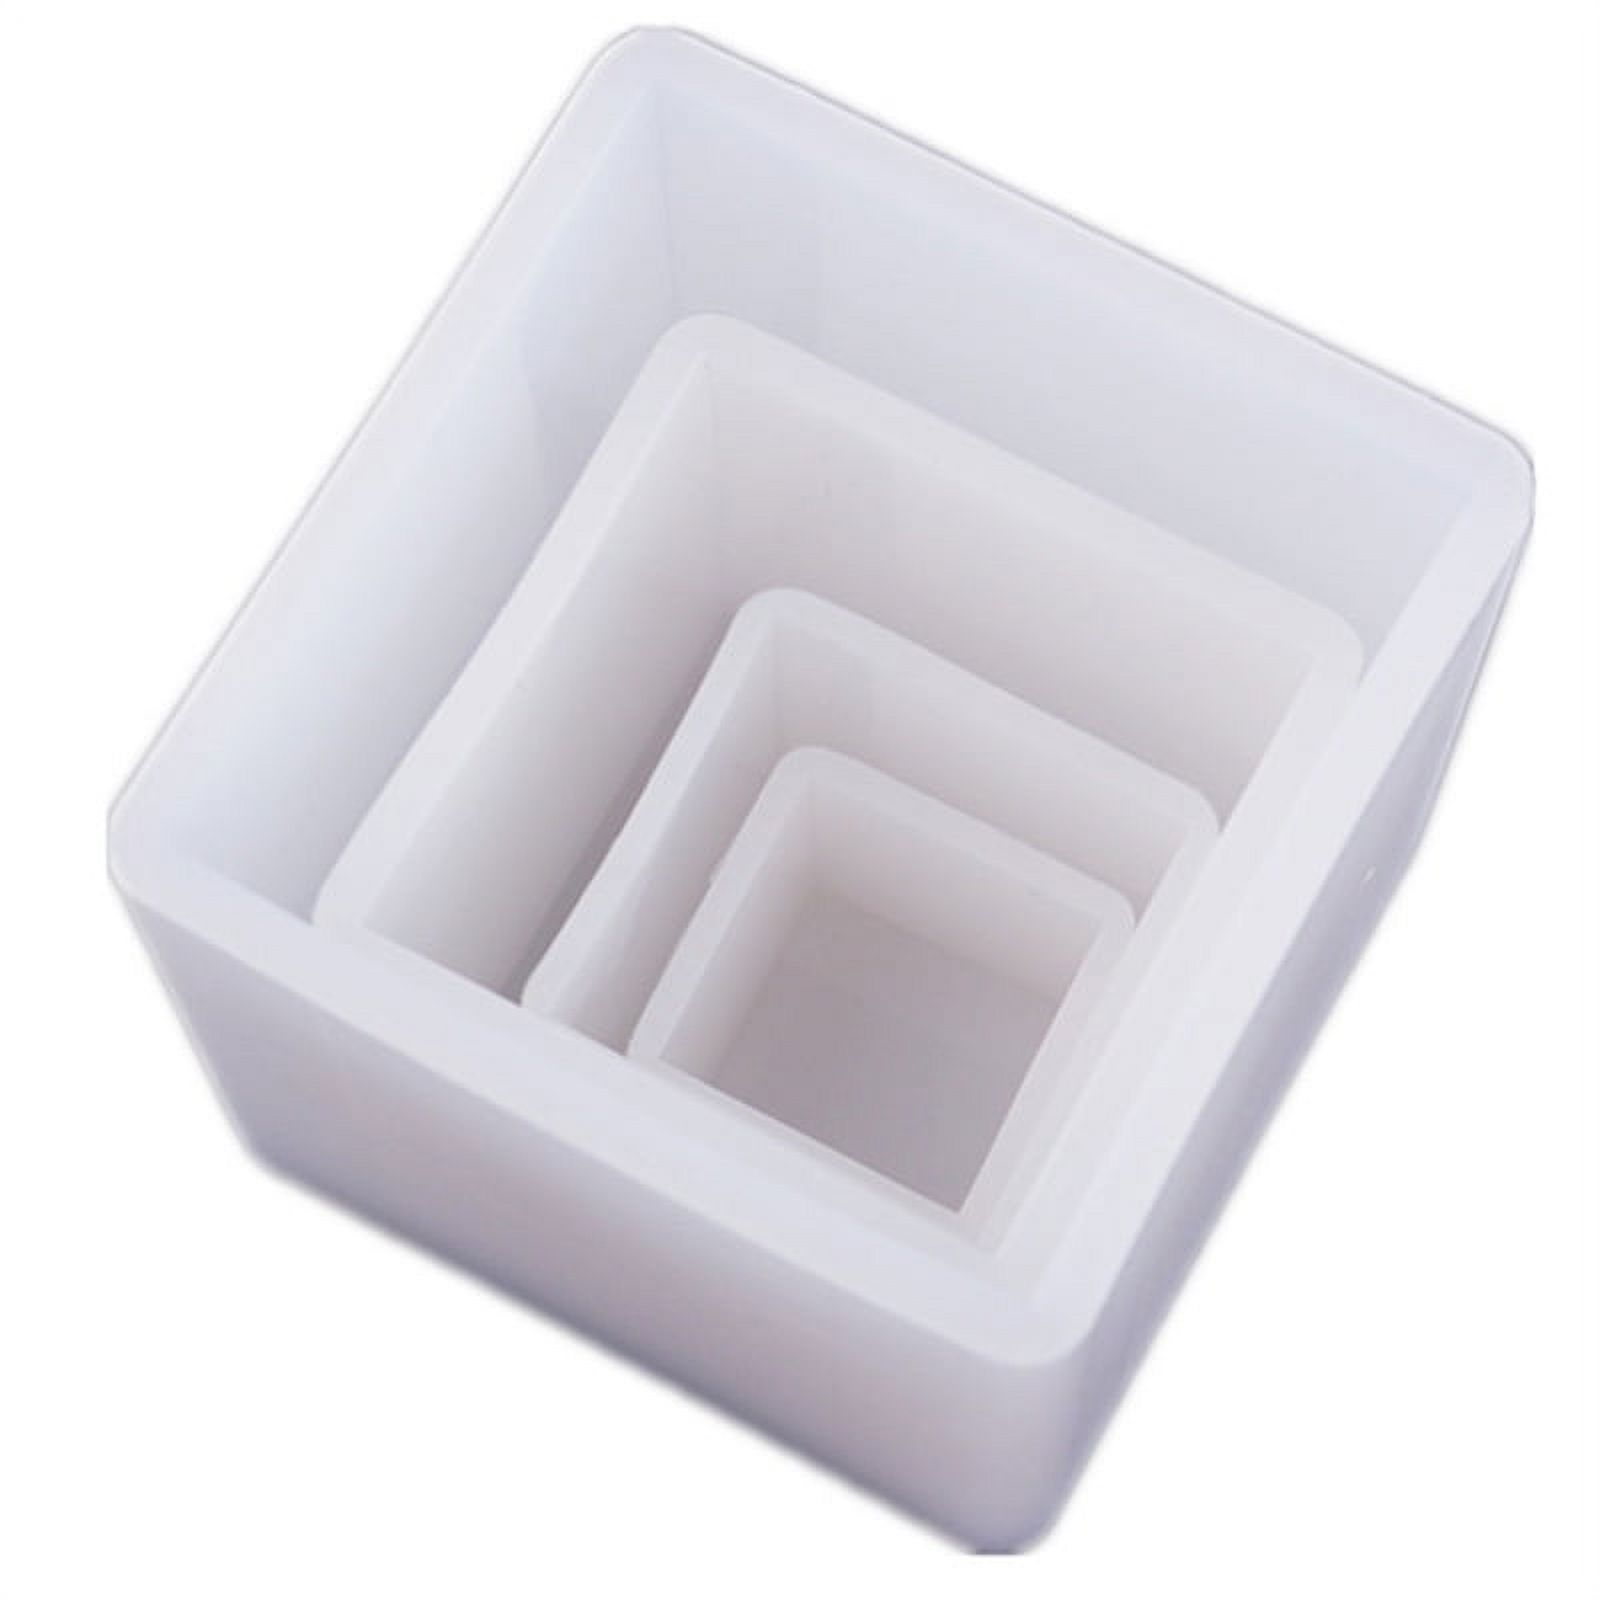 Large Square Resin Molds Large Cube Silicone Casting Molds Large Resin Mold  Glossy Deep Square Molds Deep Epoxy Resin Molds For Flowers Bouquet  Preservation 